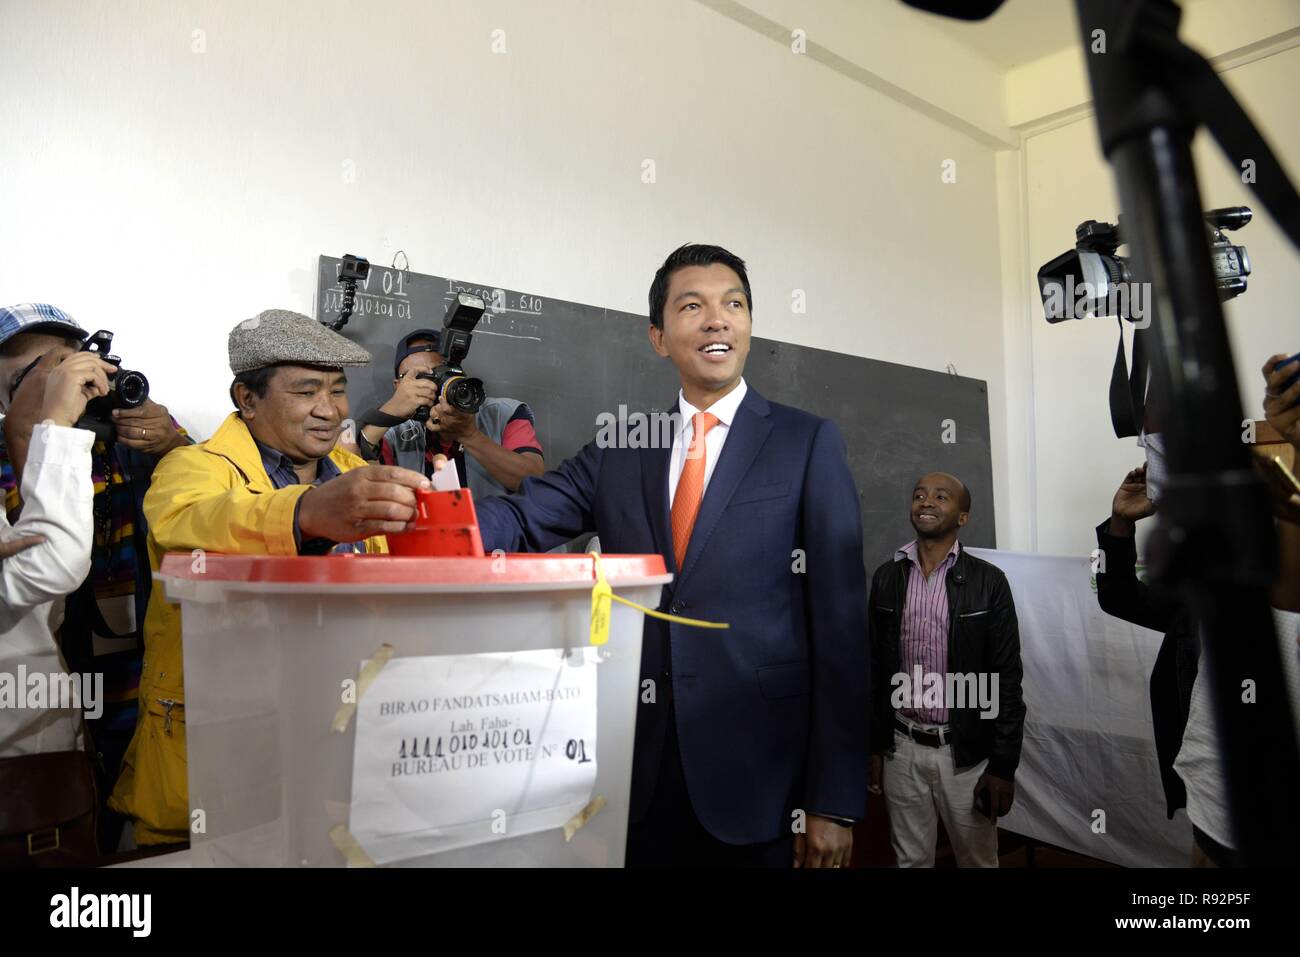 Antananarivo, Madagascar. 19th Dec, 2018. Presidential candidate Andry Rajoelina casts his ballot at a polling station in Antananarivo, Madagascar, Dec. 19, 2018. Voters went to the polls in Madagascar's second round presidential election on Wednesday to select a new president from two competing former presidents. Credit: Sitraka/Xinhua/Alamy Live News Stock Photo